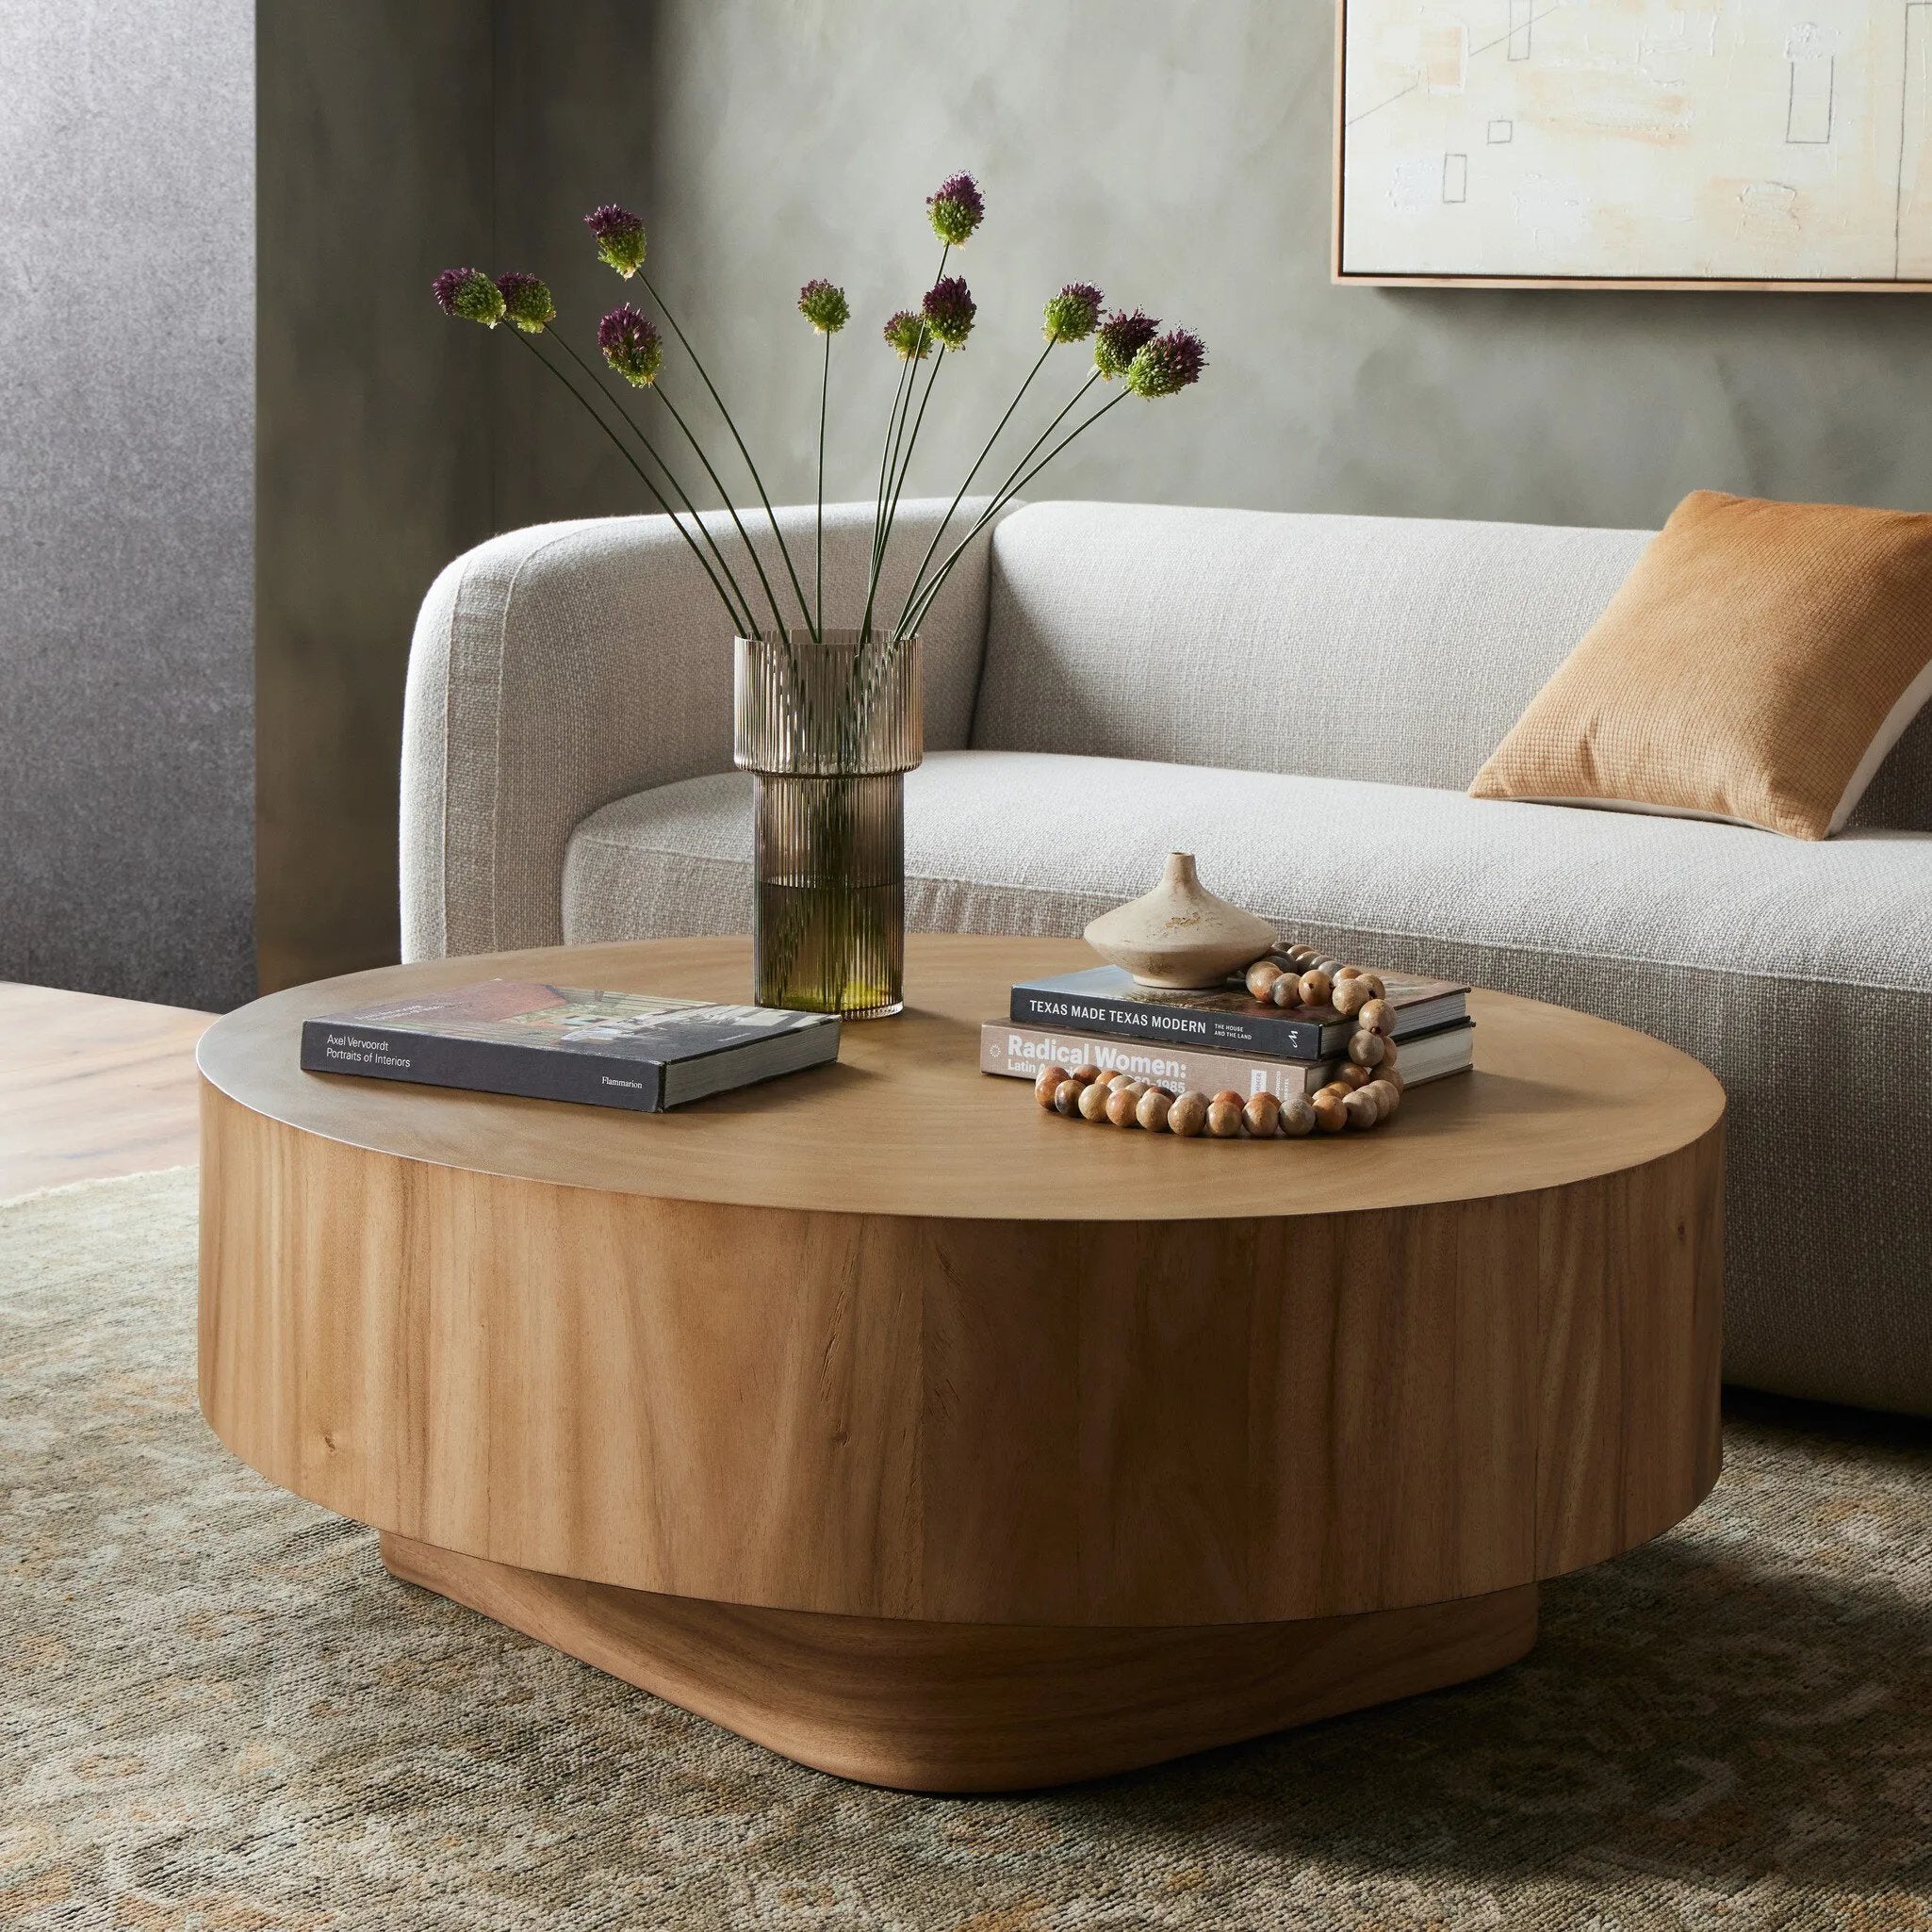 An organically shaped coffee table of Guanacaste features a golden finish with flowing grain and oyster cutting on top.Collection: Wesso Amethyst Home provides interior design, new home construction design consulting, vintage area rugs, and lighting in the Calabasas metro area.